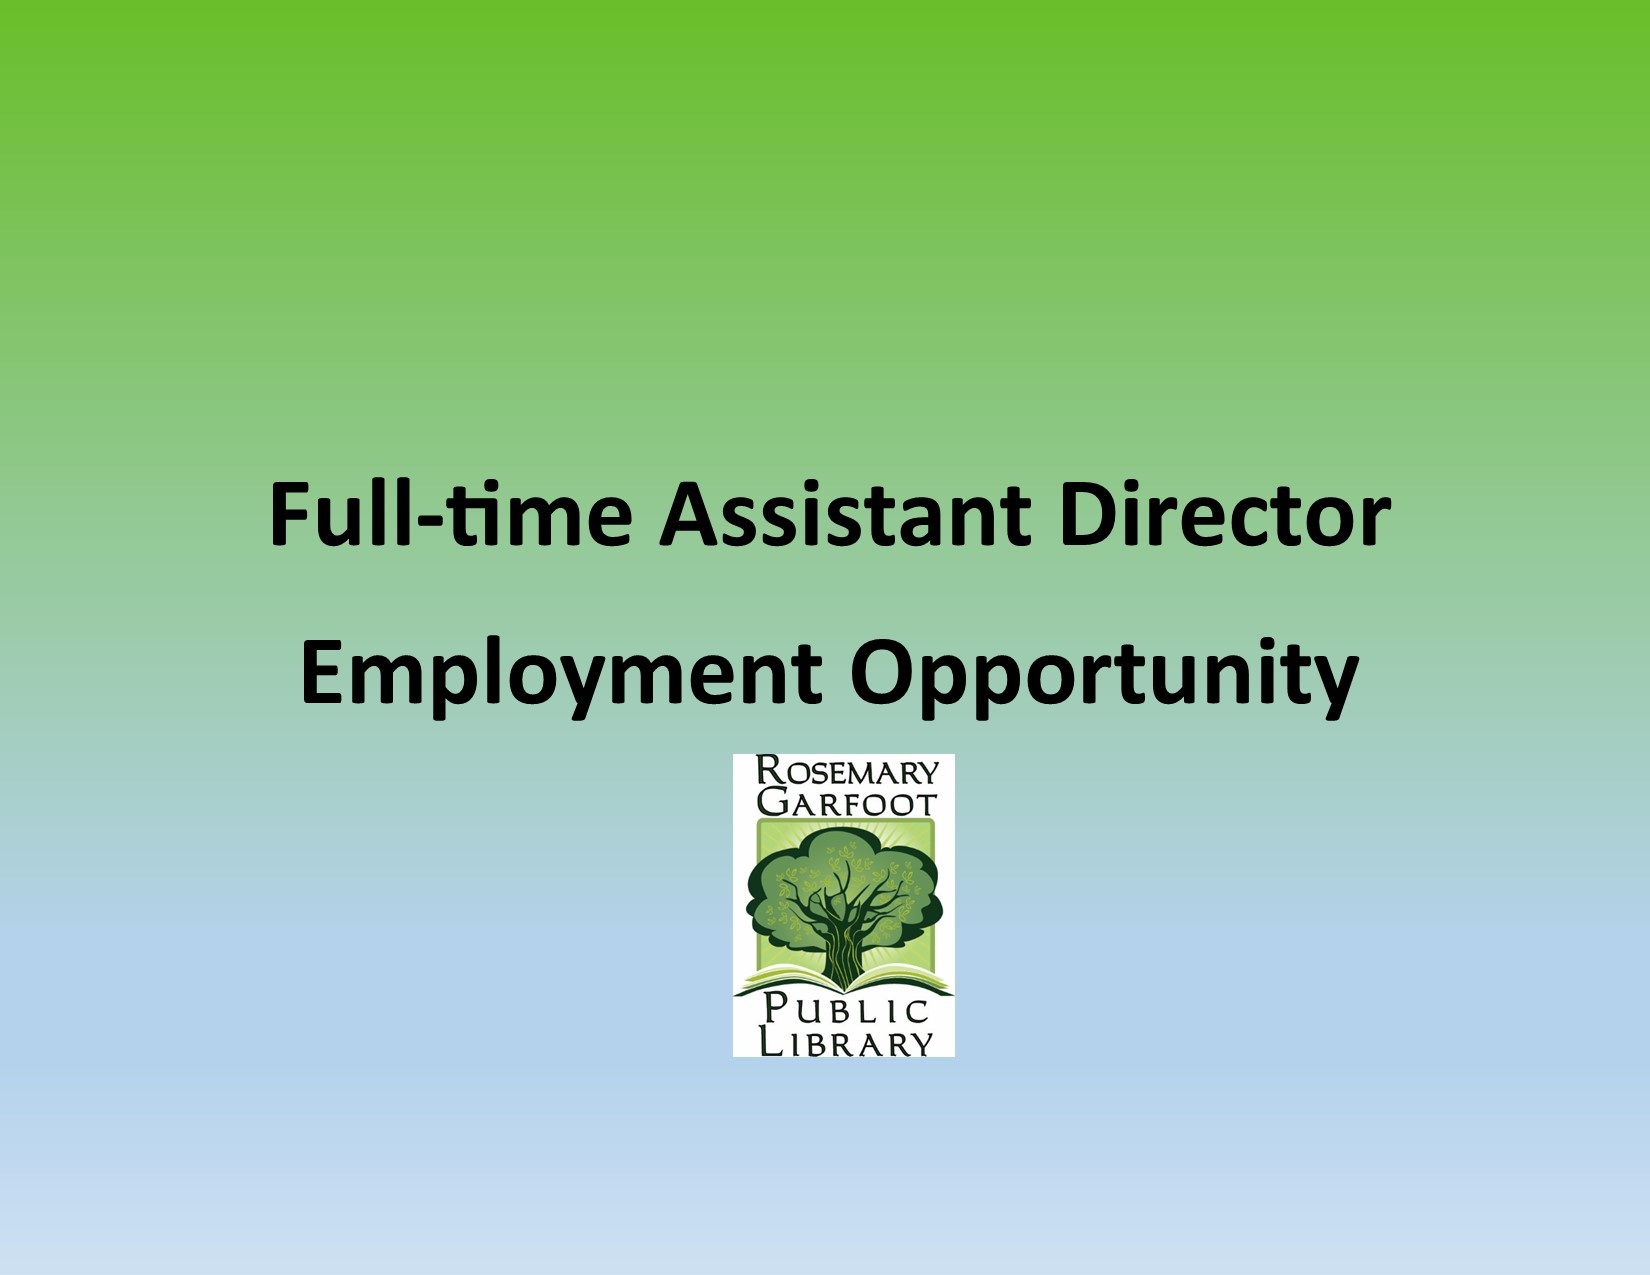 Message: Full-time Assistant Director Employment Opportunity.  Library logo beneath.  Logo is a green tree with an open book at the base.